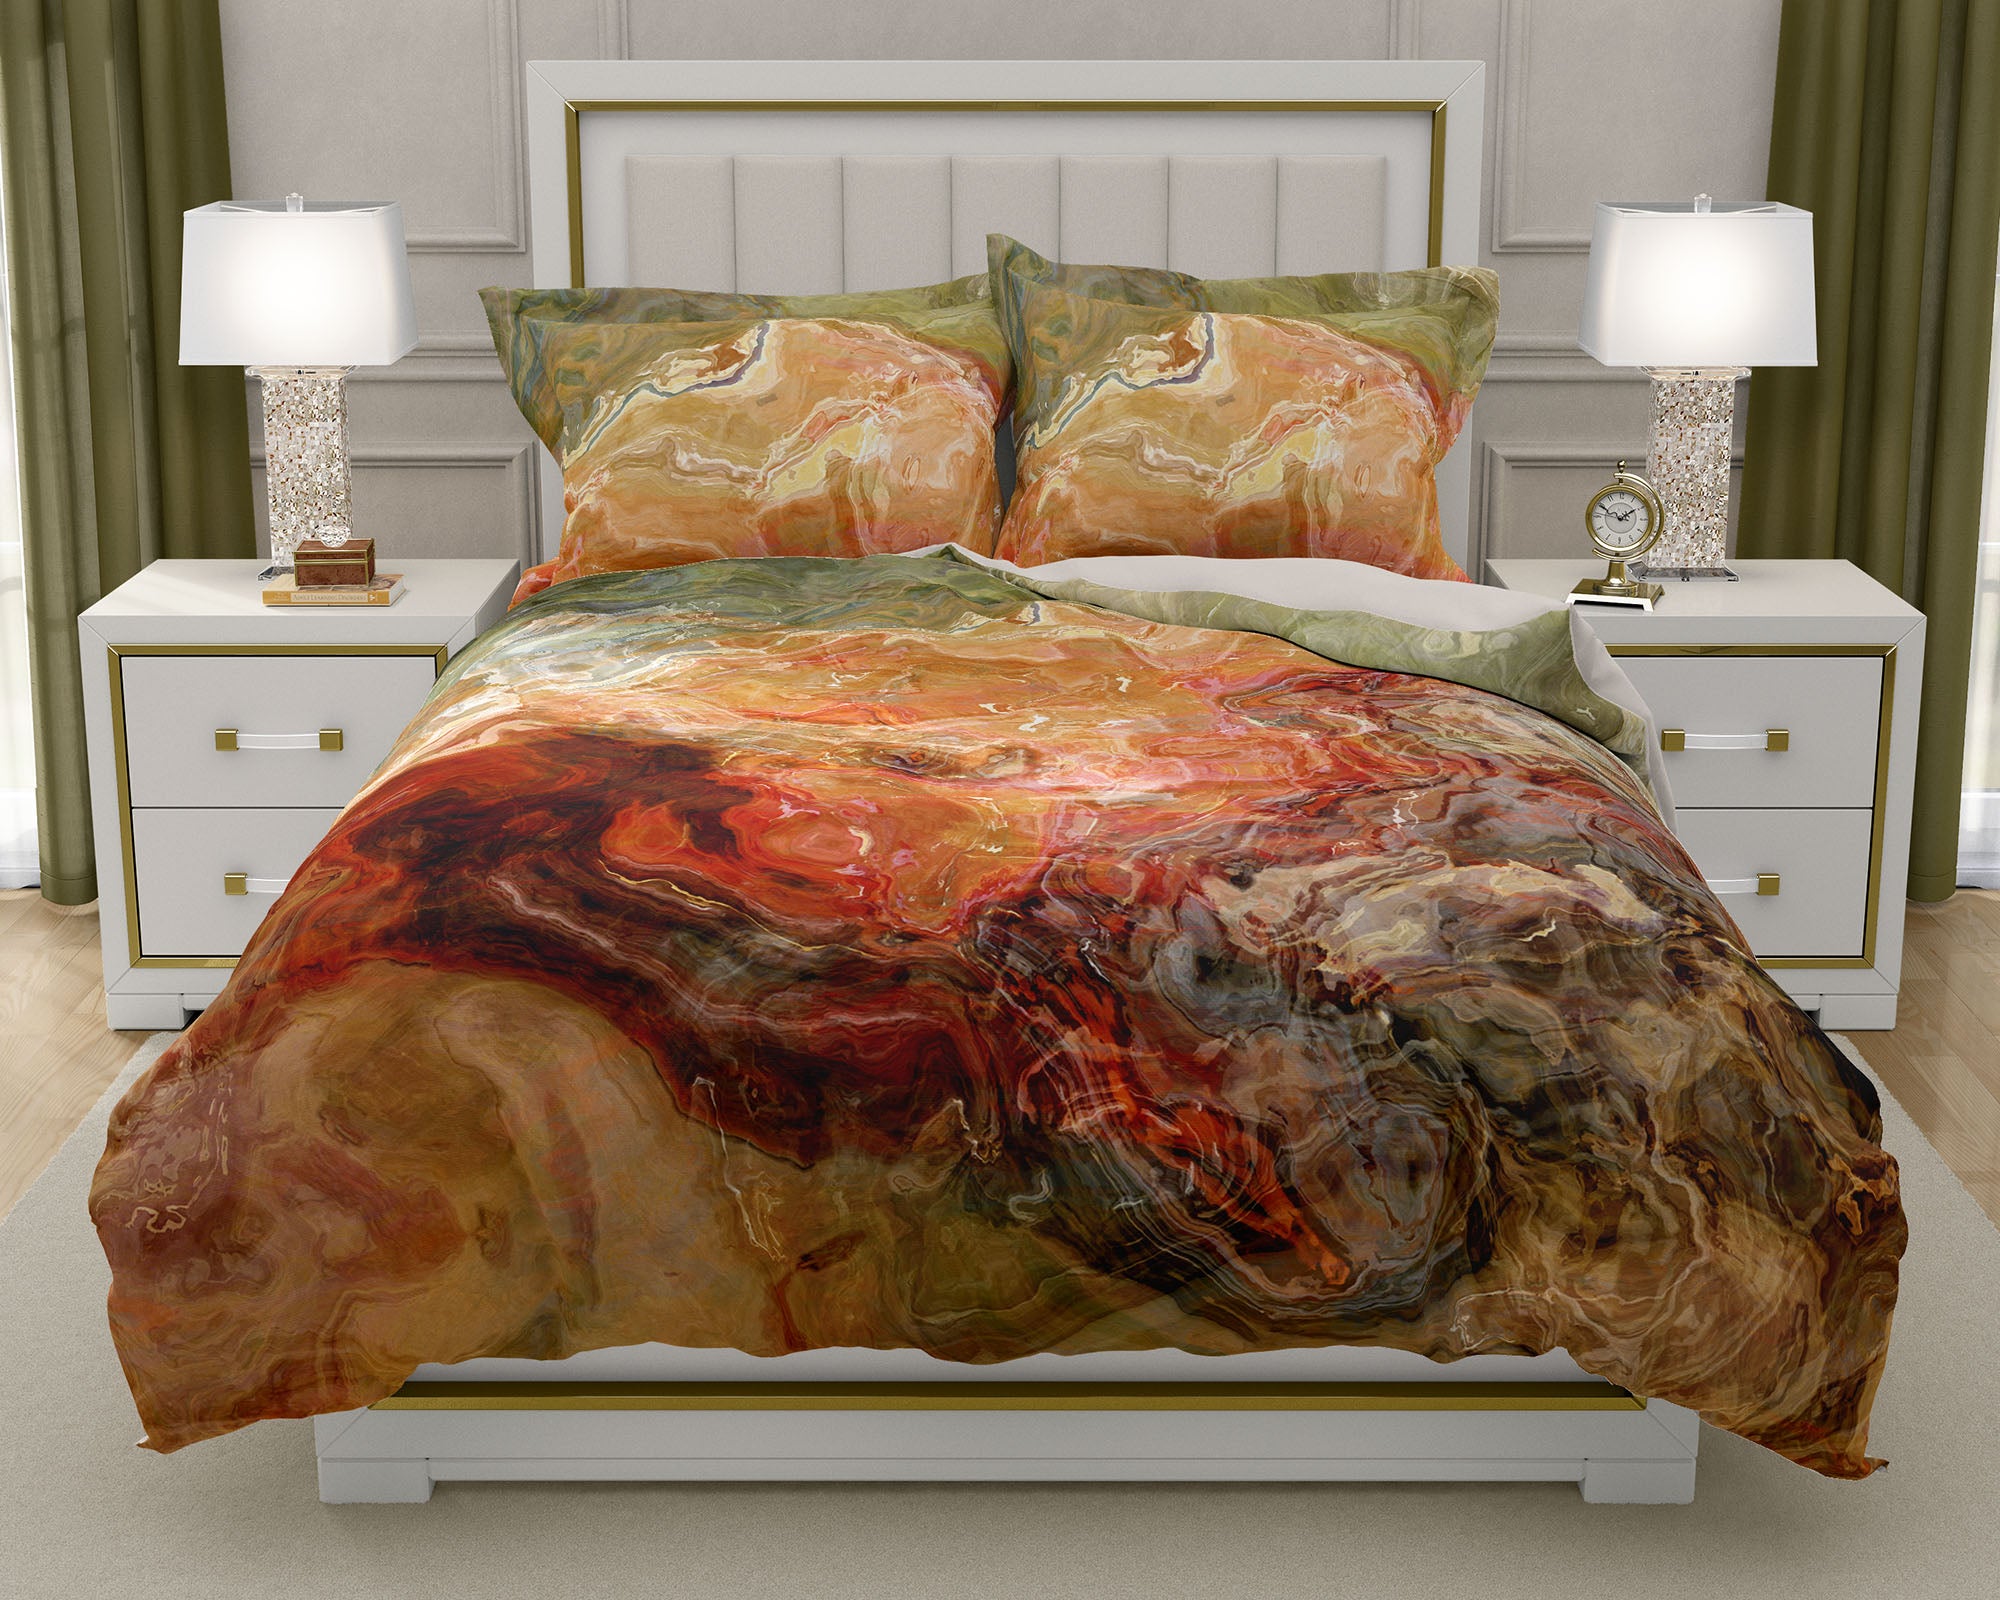 Duvet Cover With Abstract Art King Or Queen In Rust Brown And